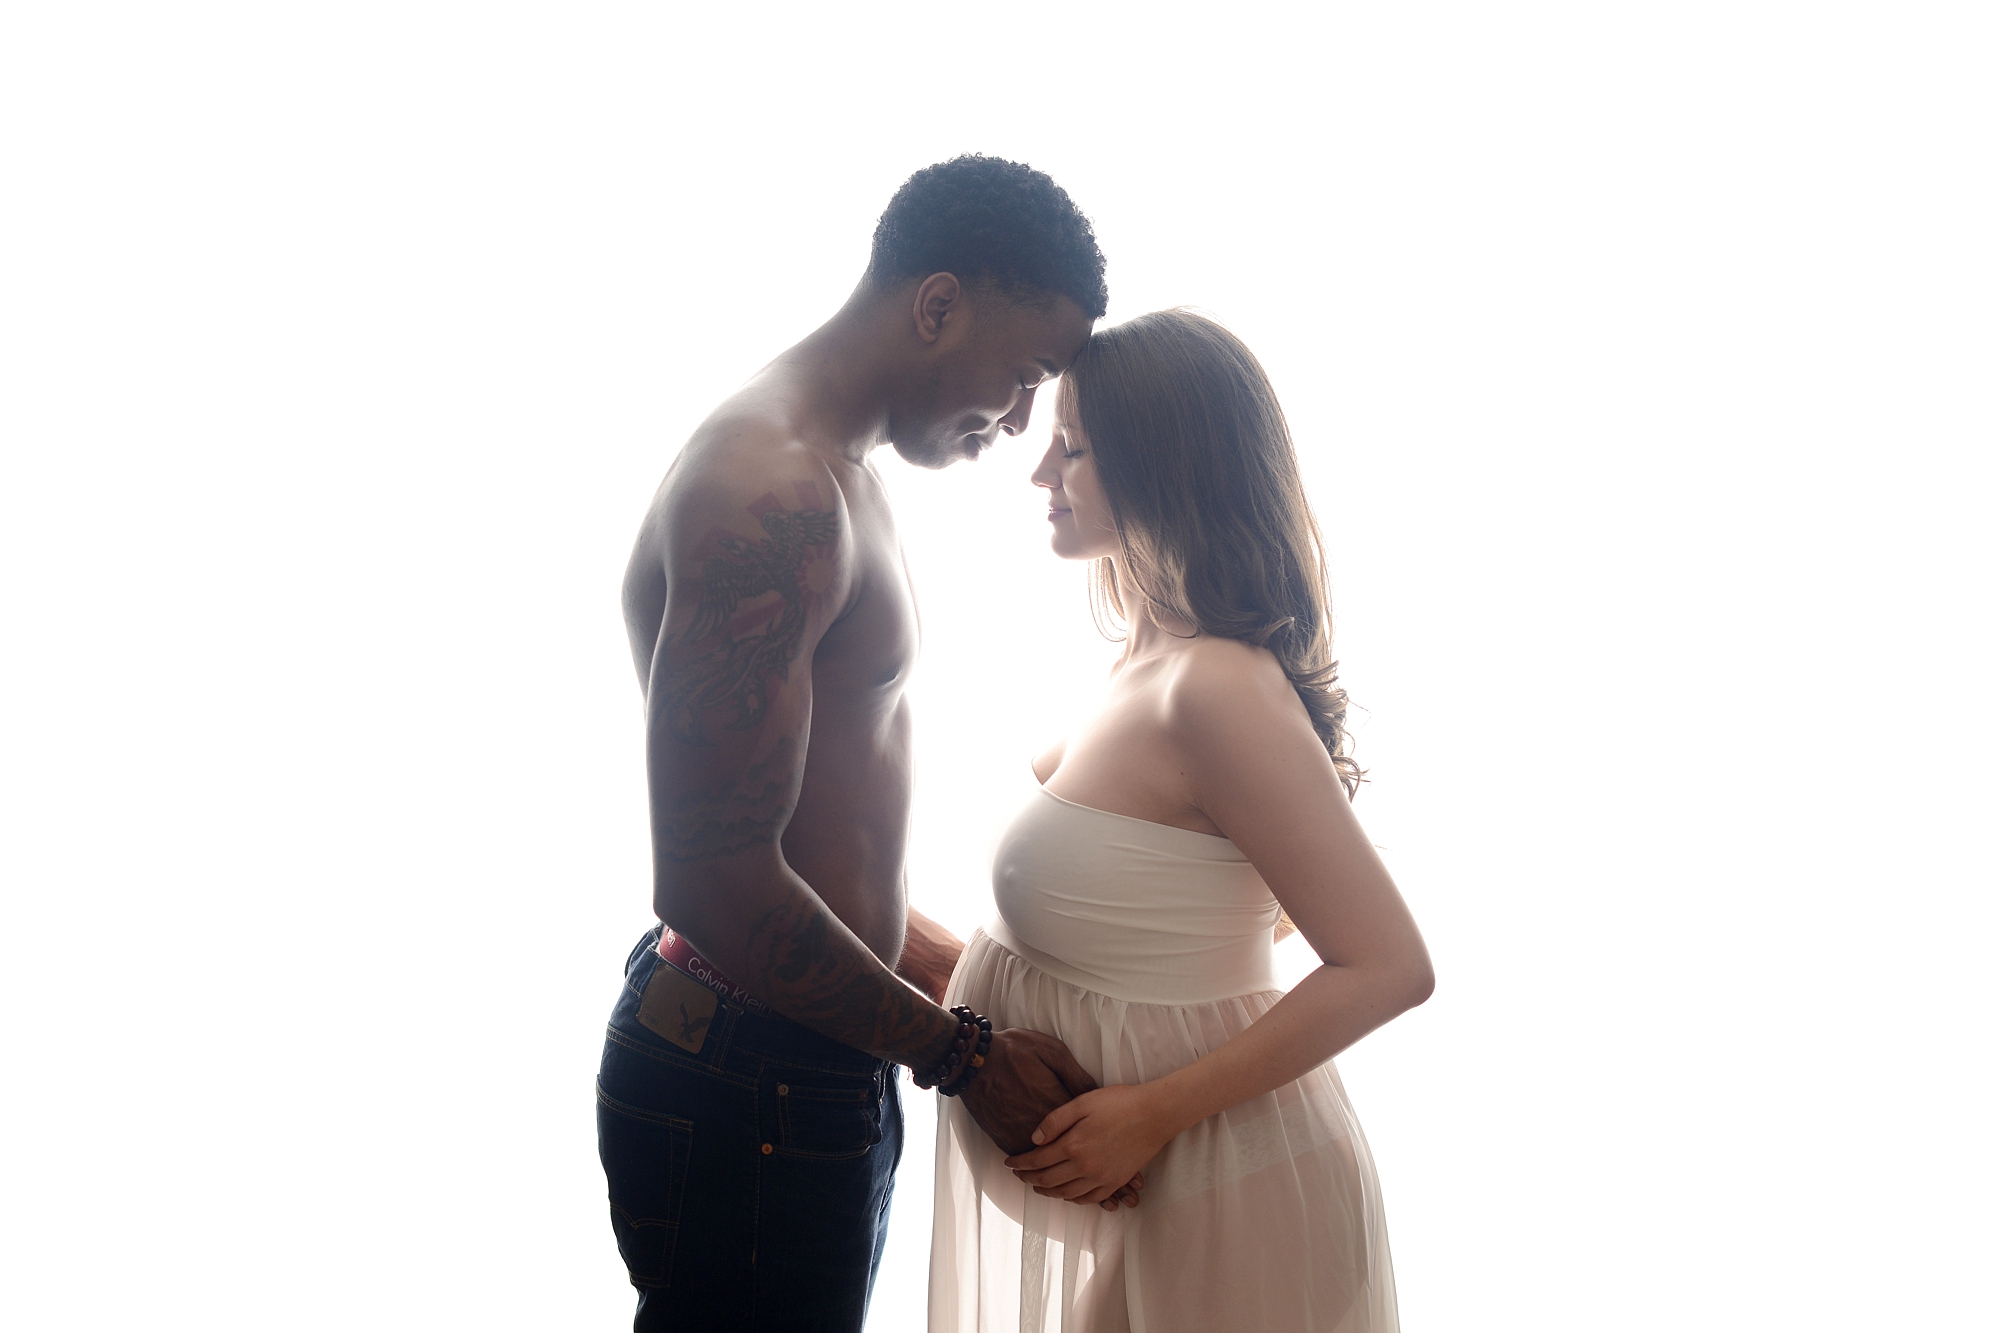  MATERNITY SESSION IN QUEENS